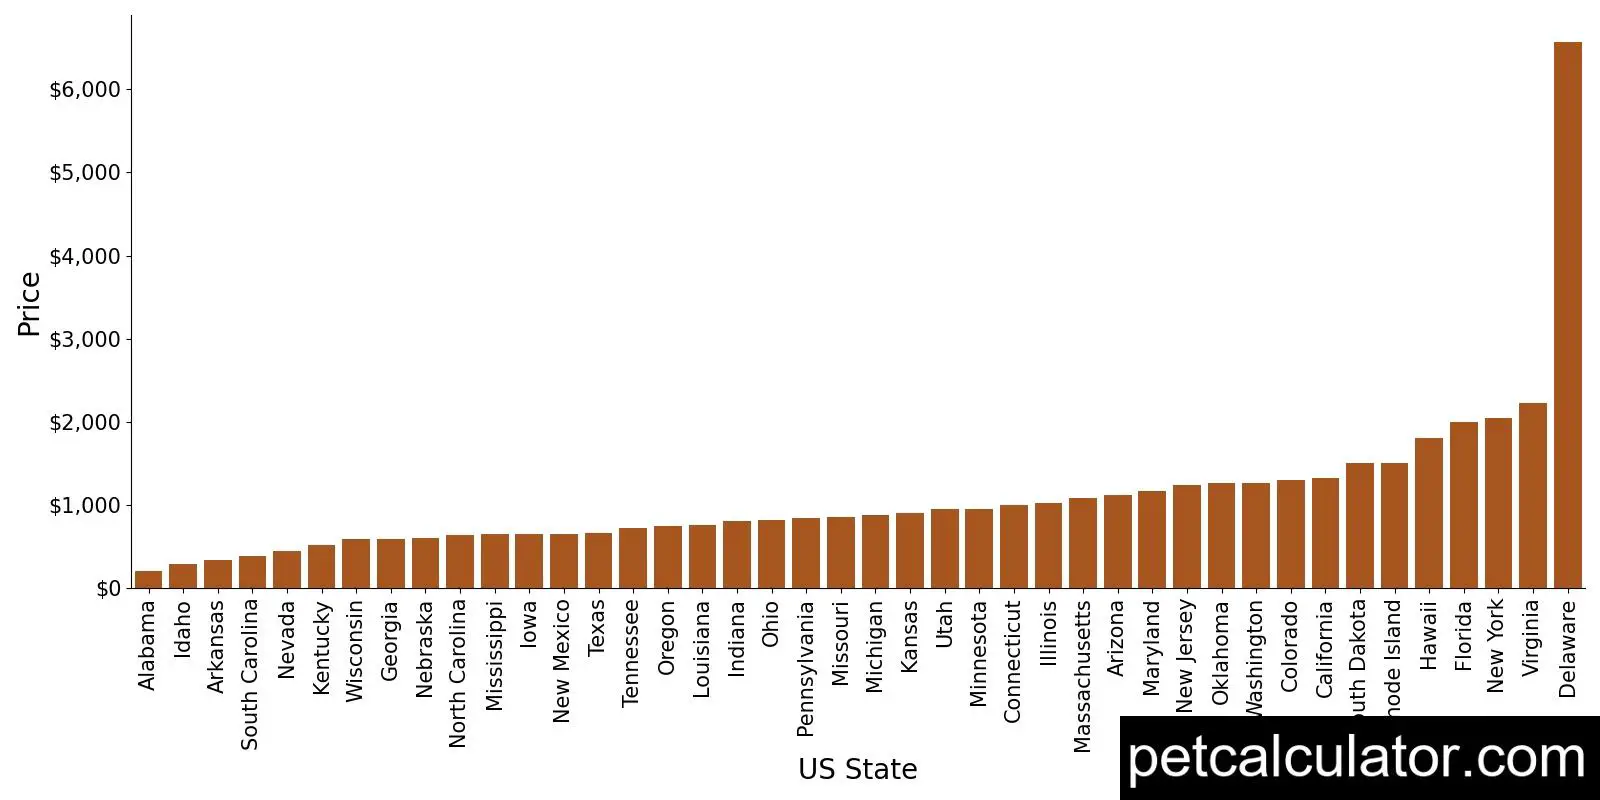 Price of American Pit Bull Terrier by US State 